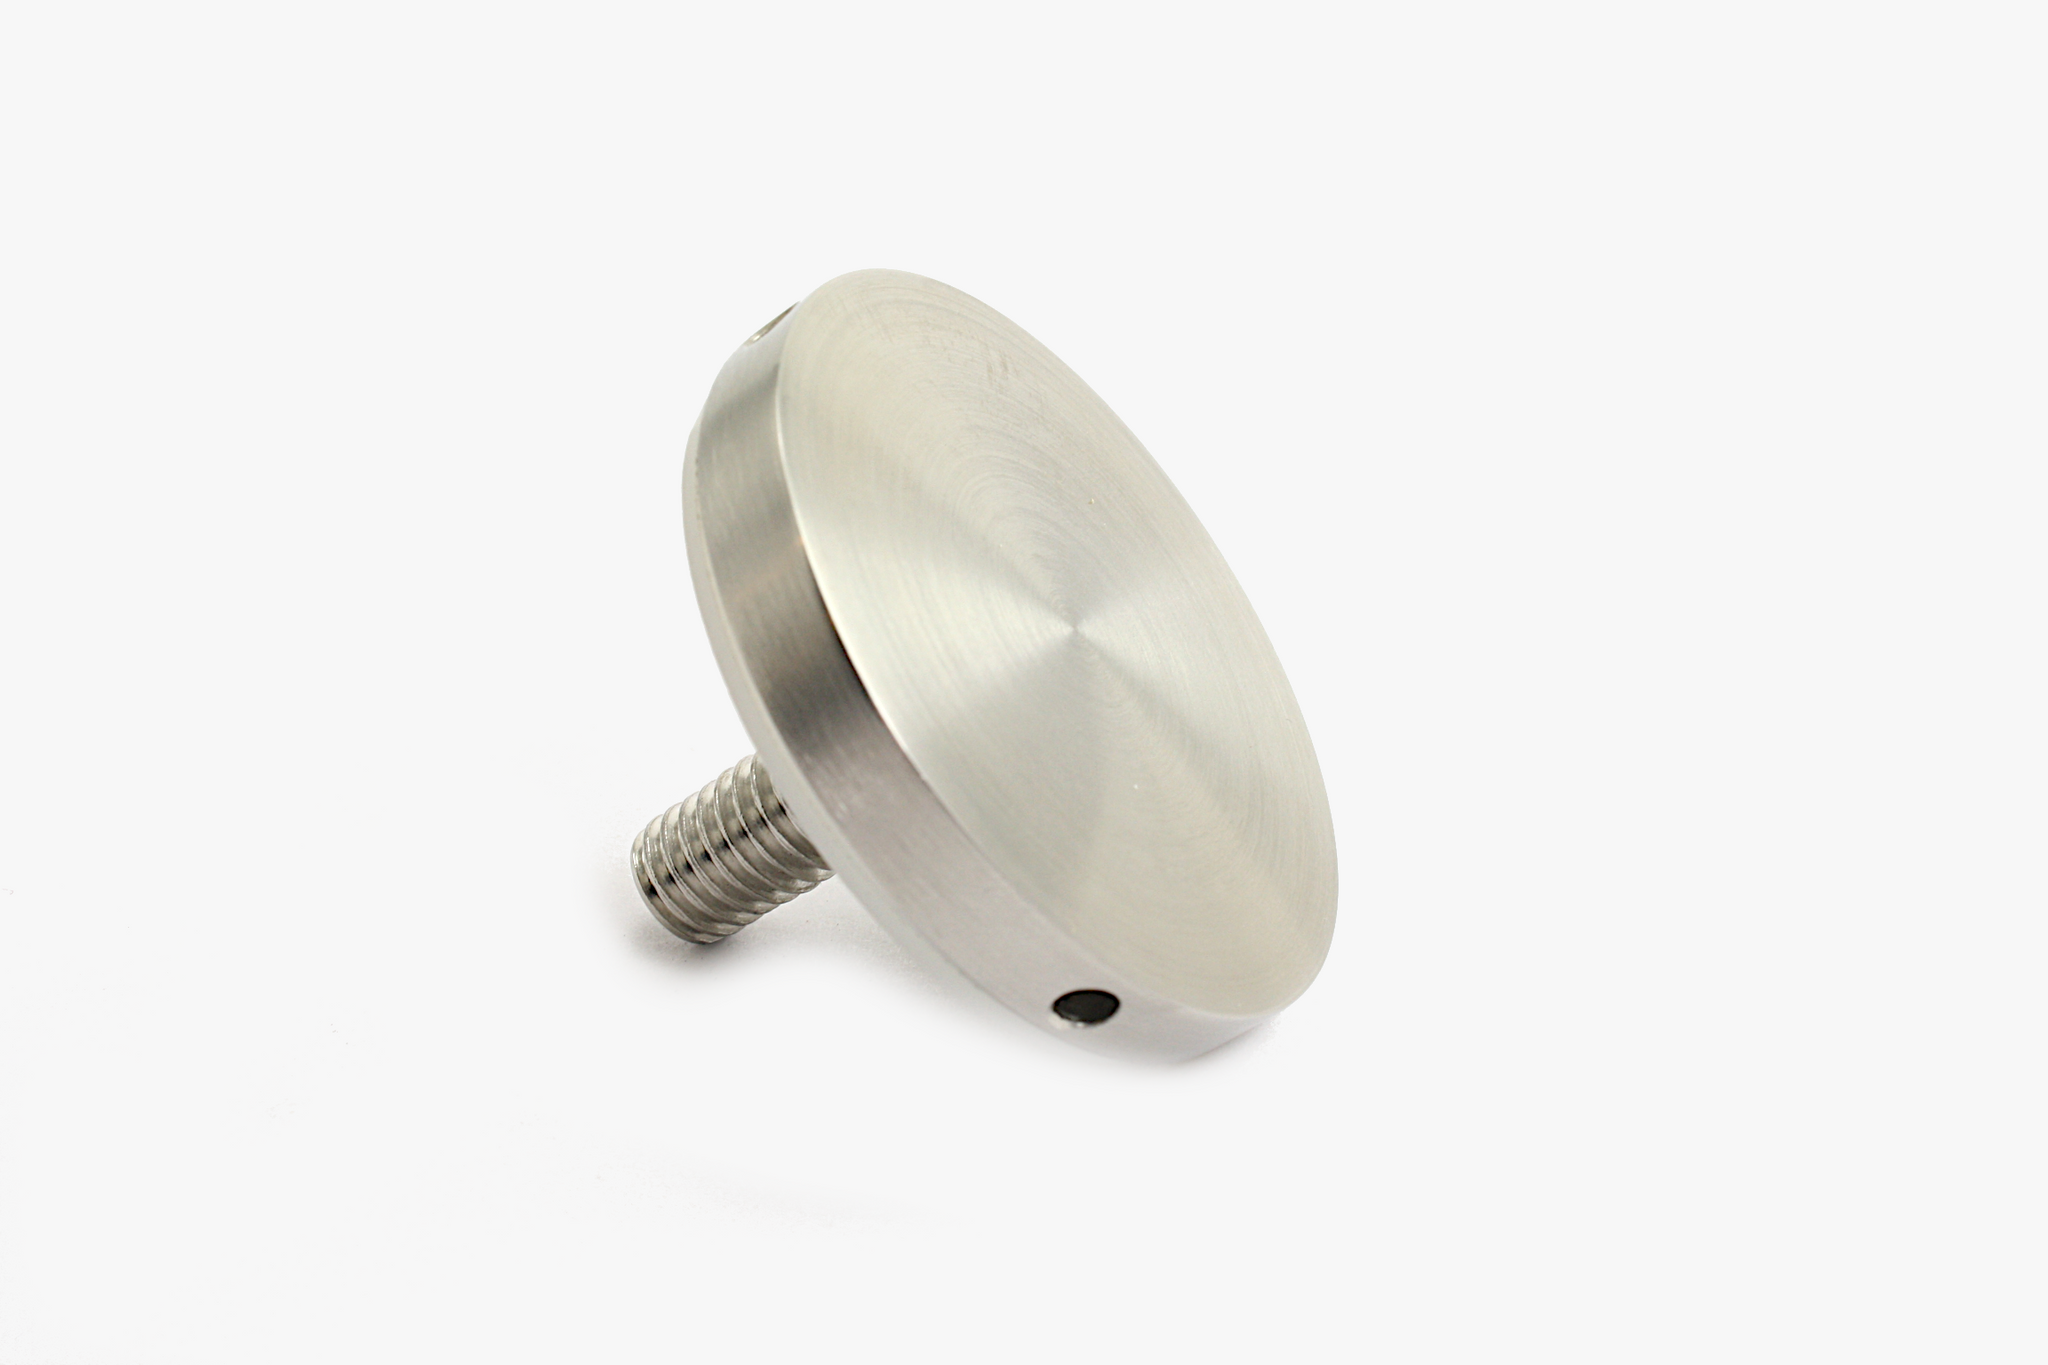 1 1/2" diameter flat stand off cap (plain) - Brushed stainless steel